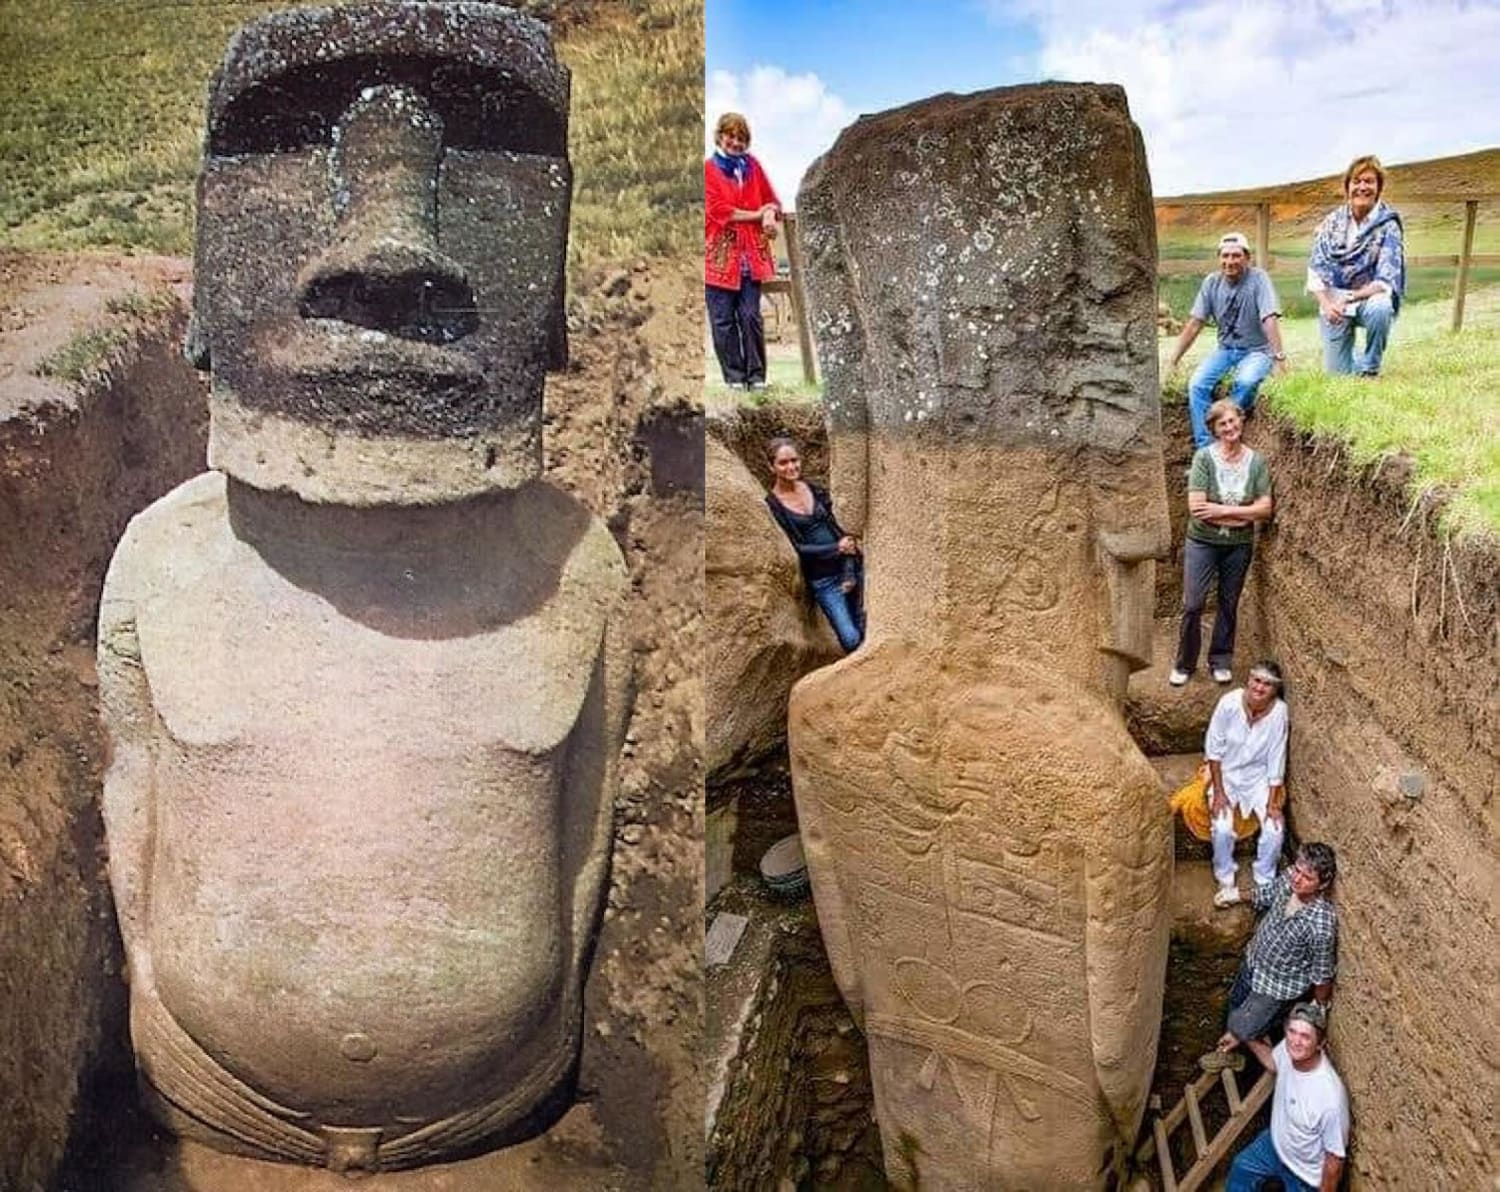 The buried bodies of the iconic Easter Island moai basalt statues, built by the Rapa Nui people between 1250-1500 CE, with petroglyphs carved on their back